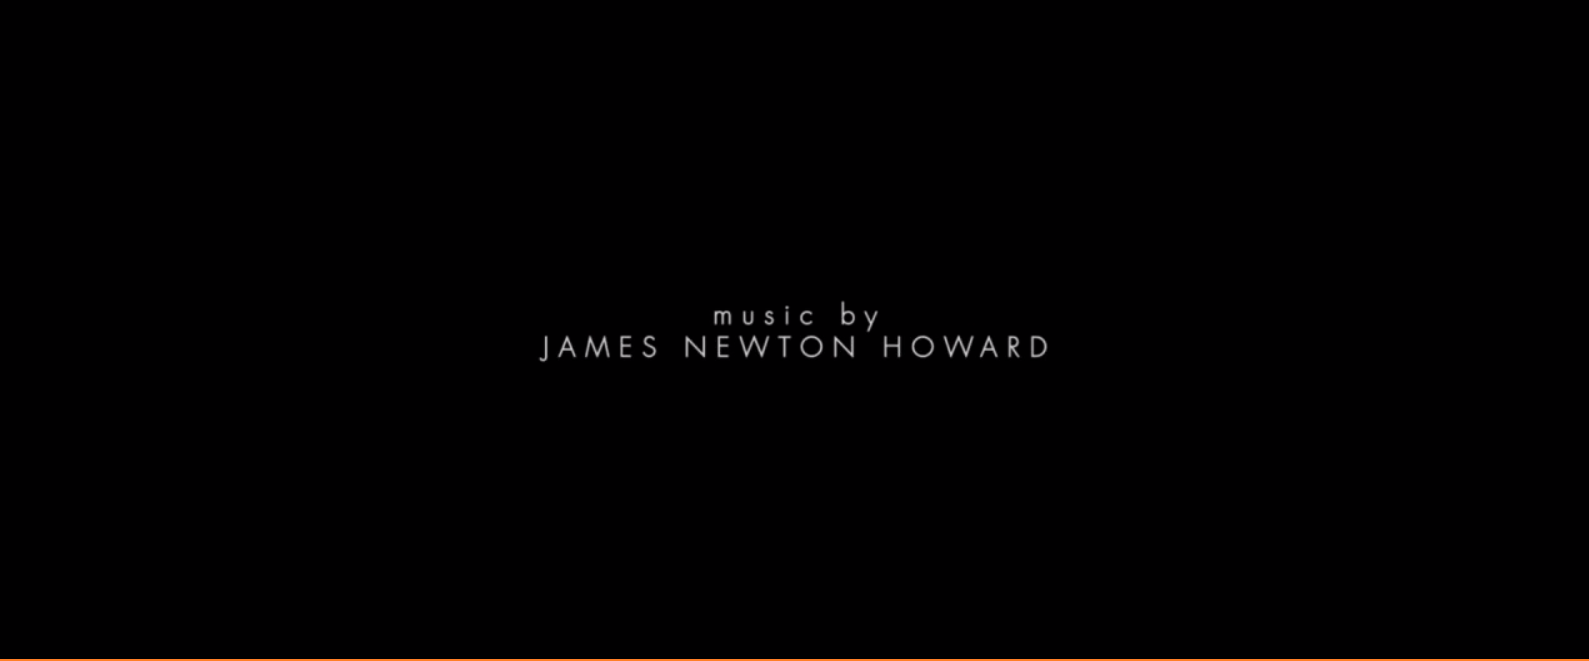 THE COMPOSER CREDITS PROJECT: JAMES NEWTON HOWARD